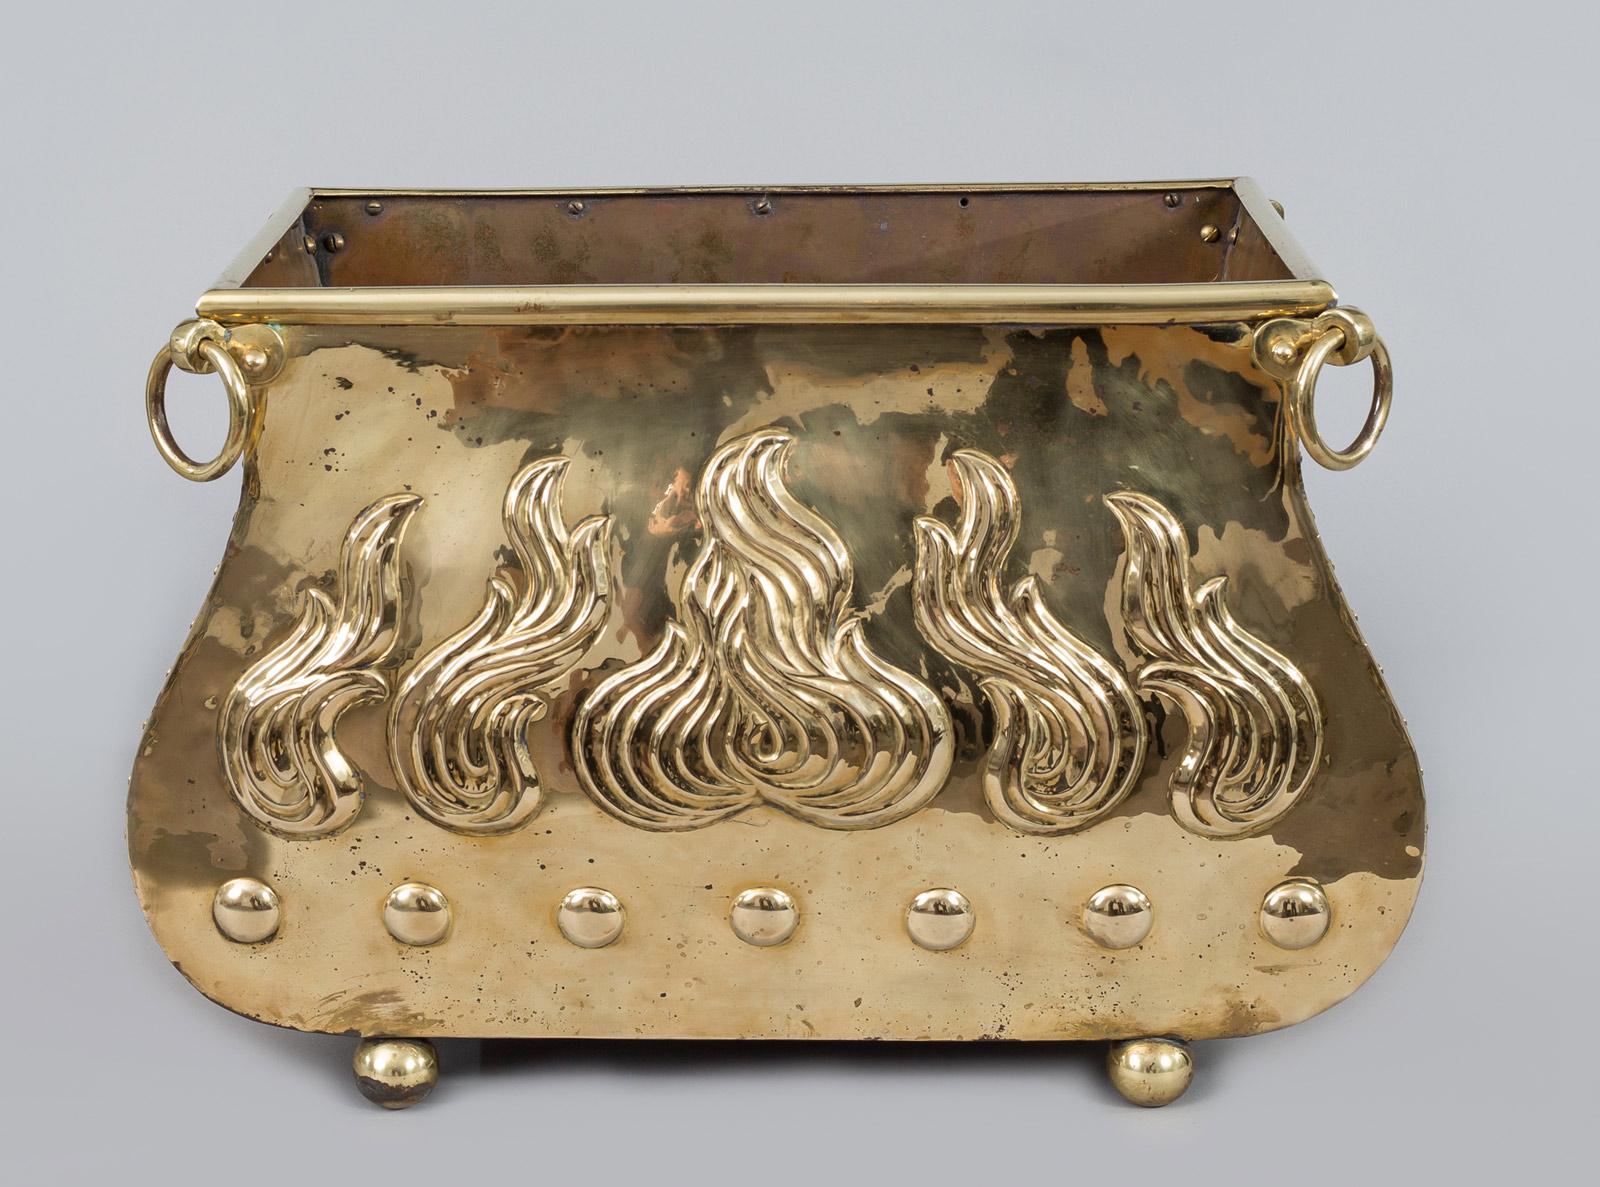 Embossed Brass Serpentine-Shaped Coal Scuttle For Sale